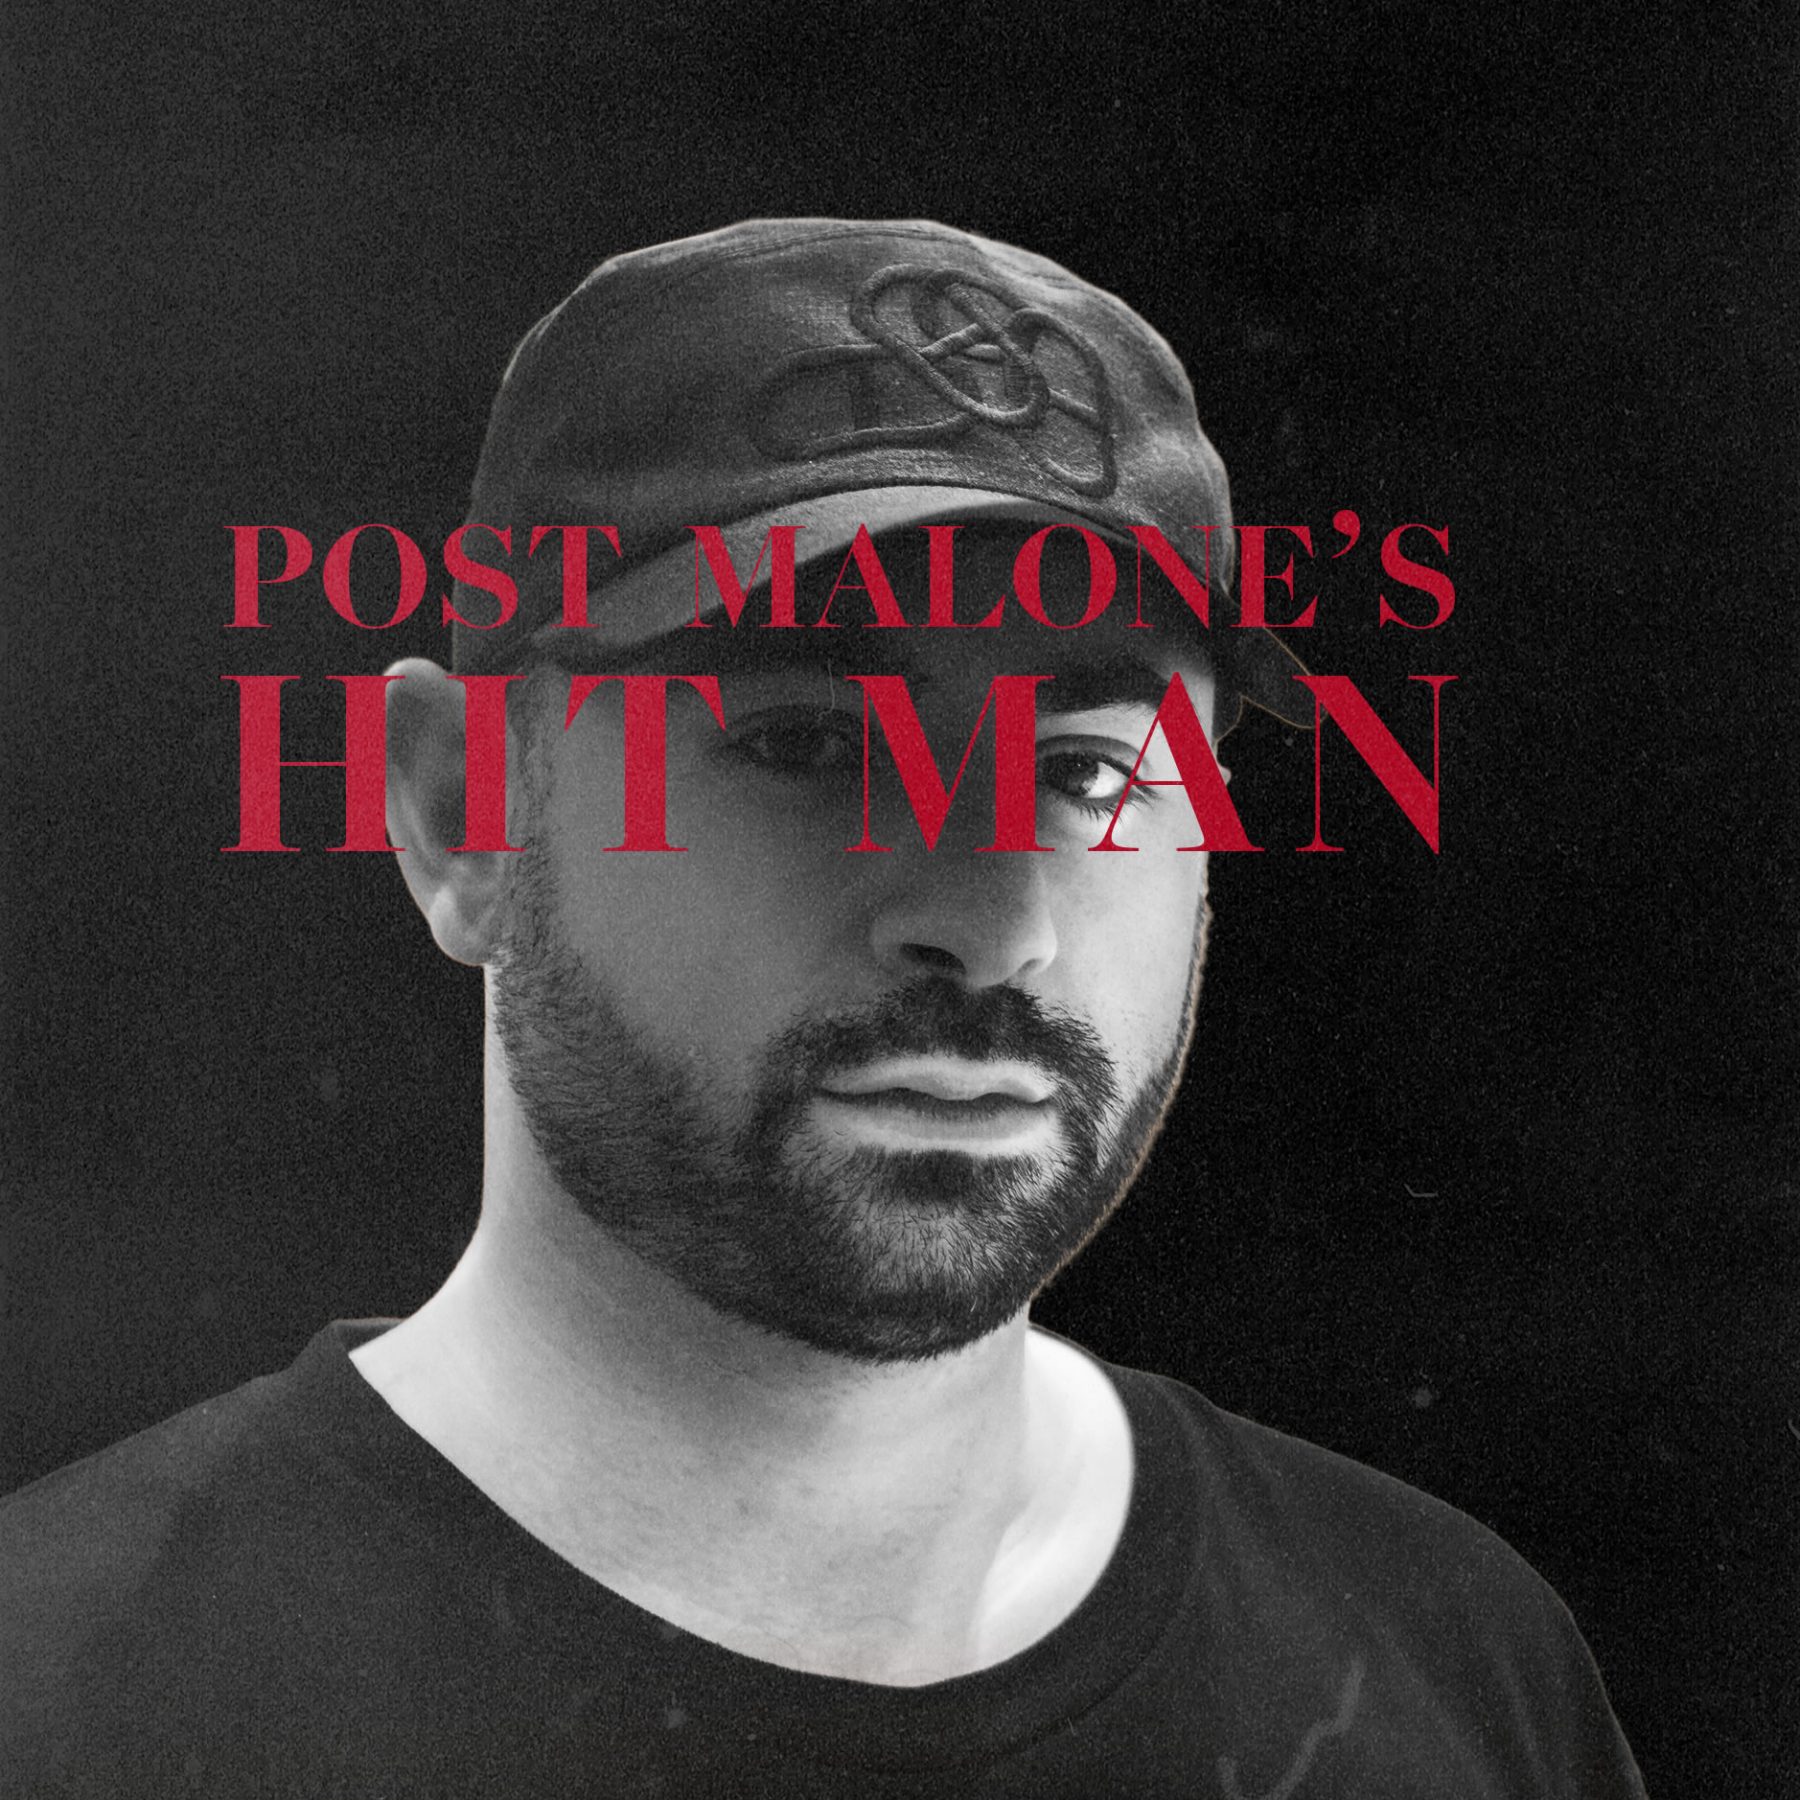 Issue 58: Post Malone's Hit Man